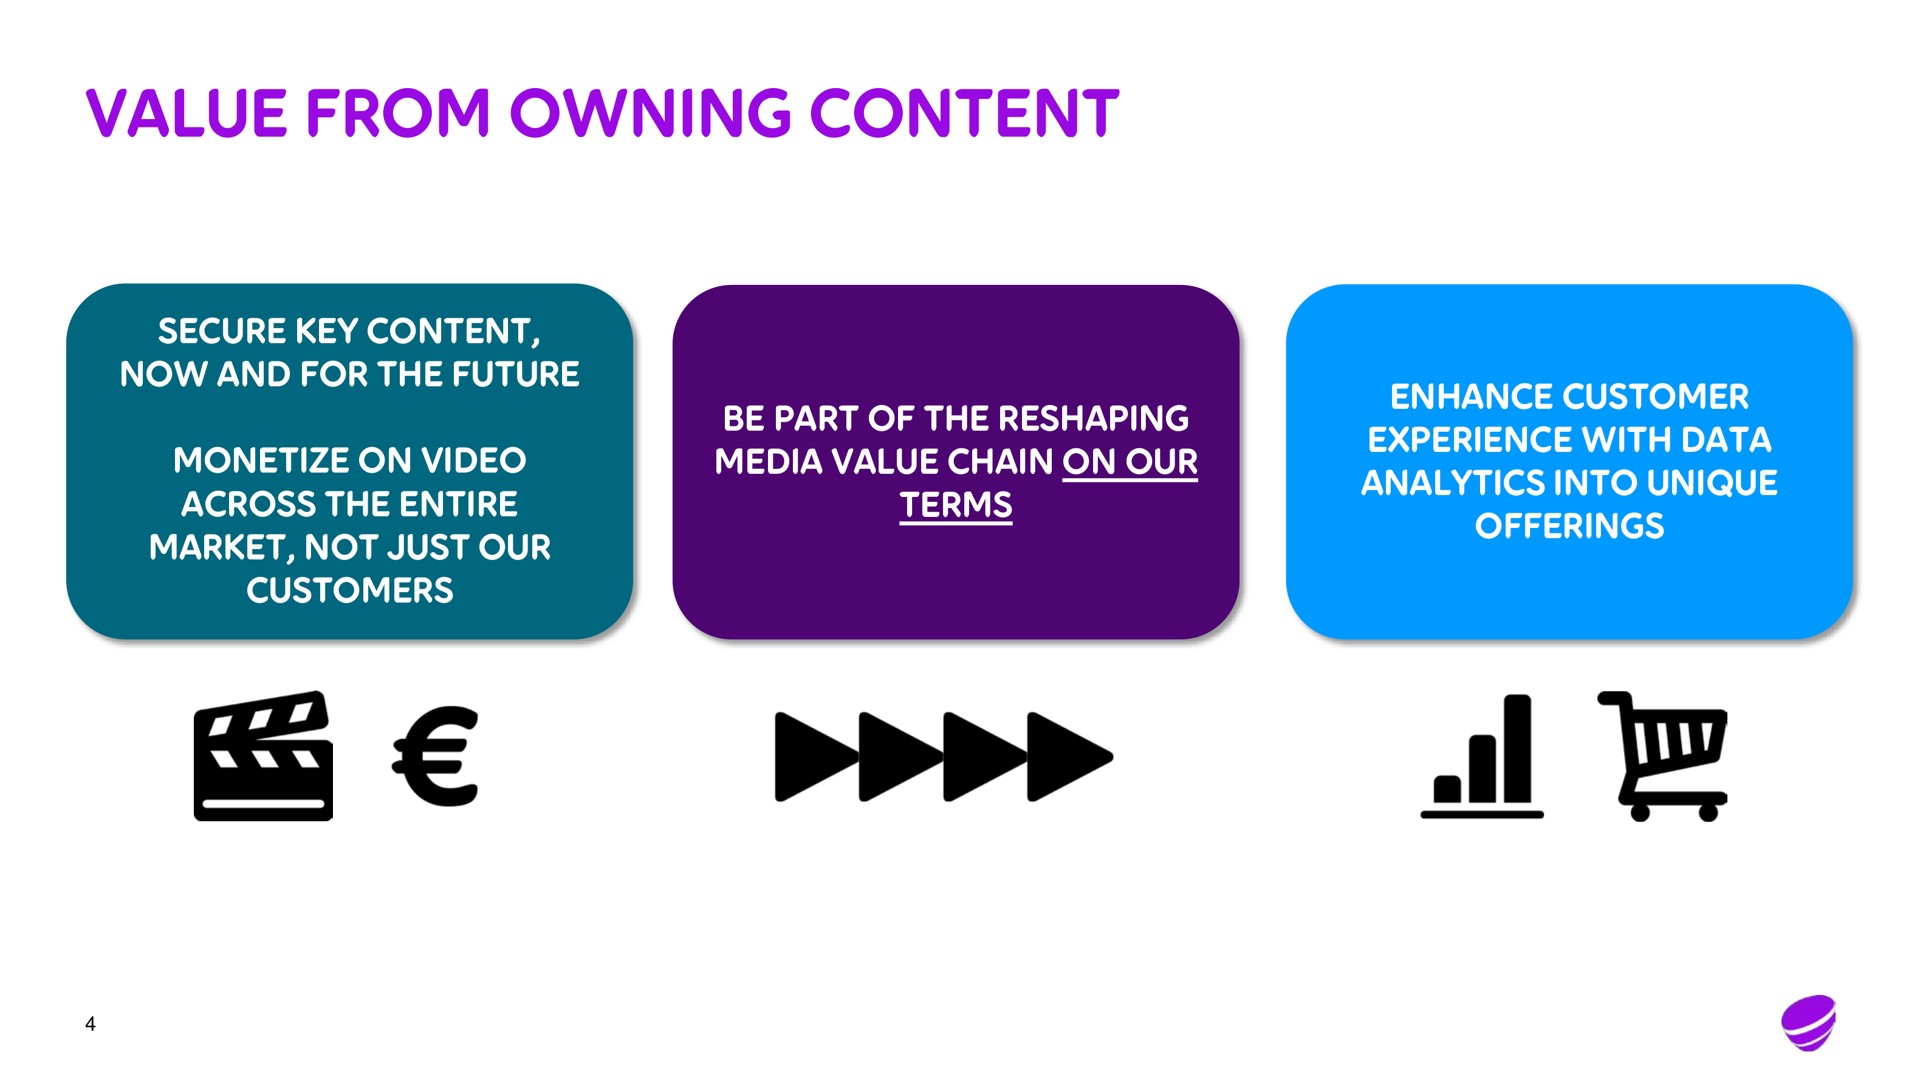 value from owning content | Telia Company